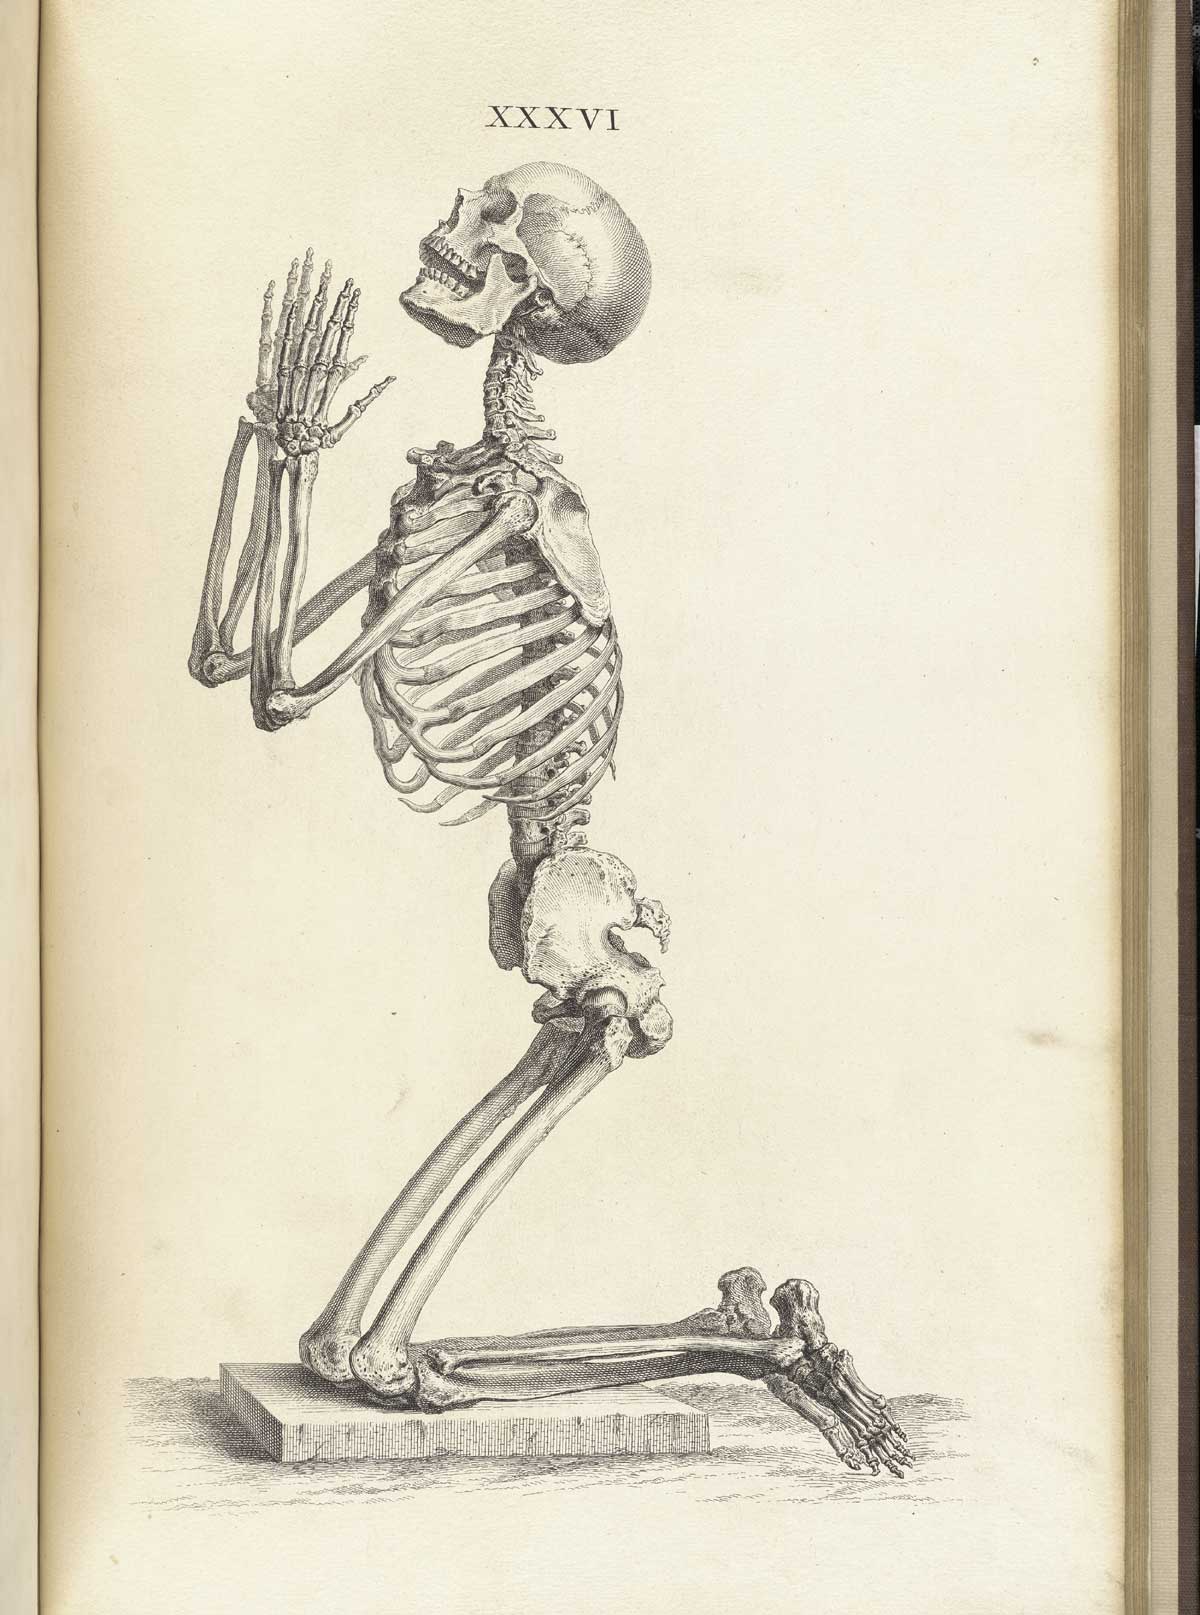 Engraving of a kneeling skeleton viewed from the side, looking up with hands together in prayer.